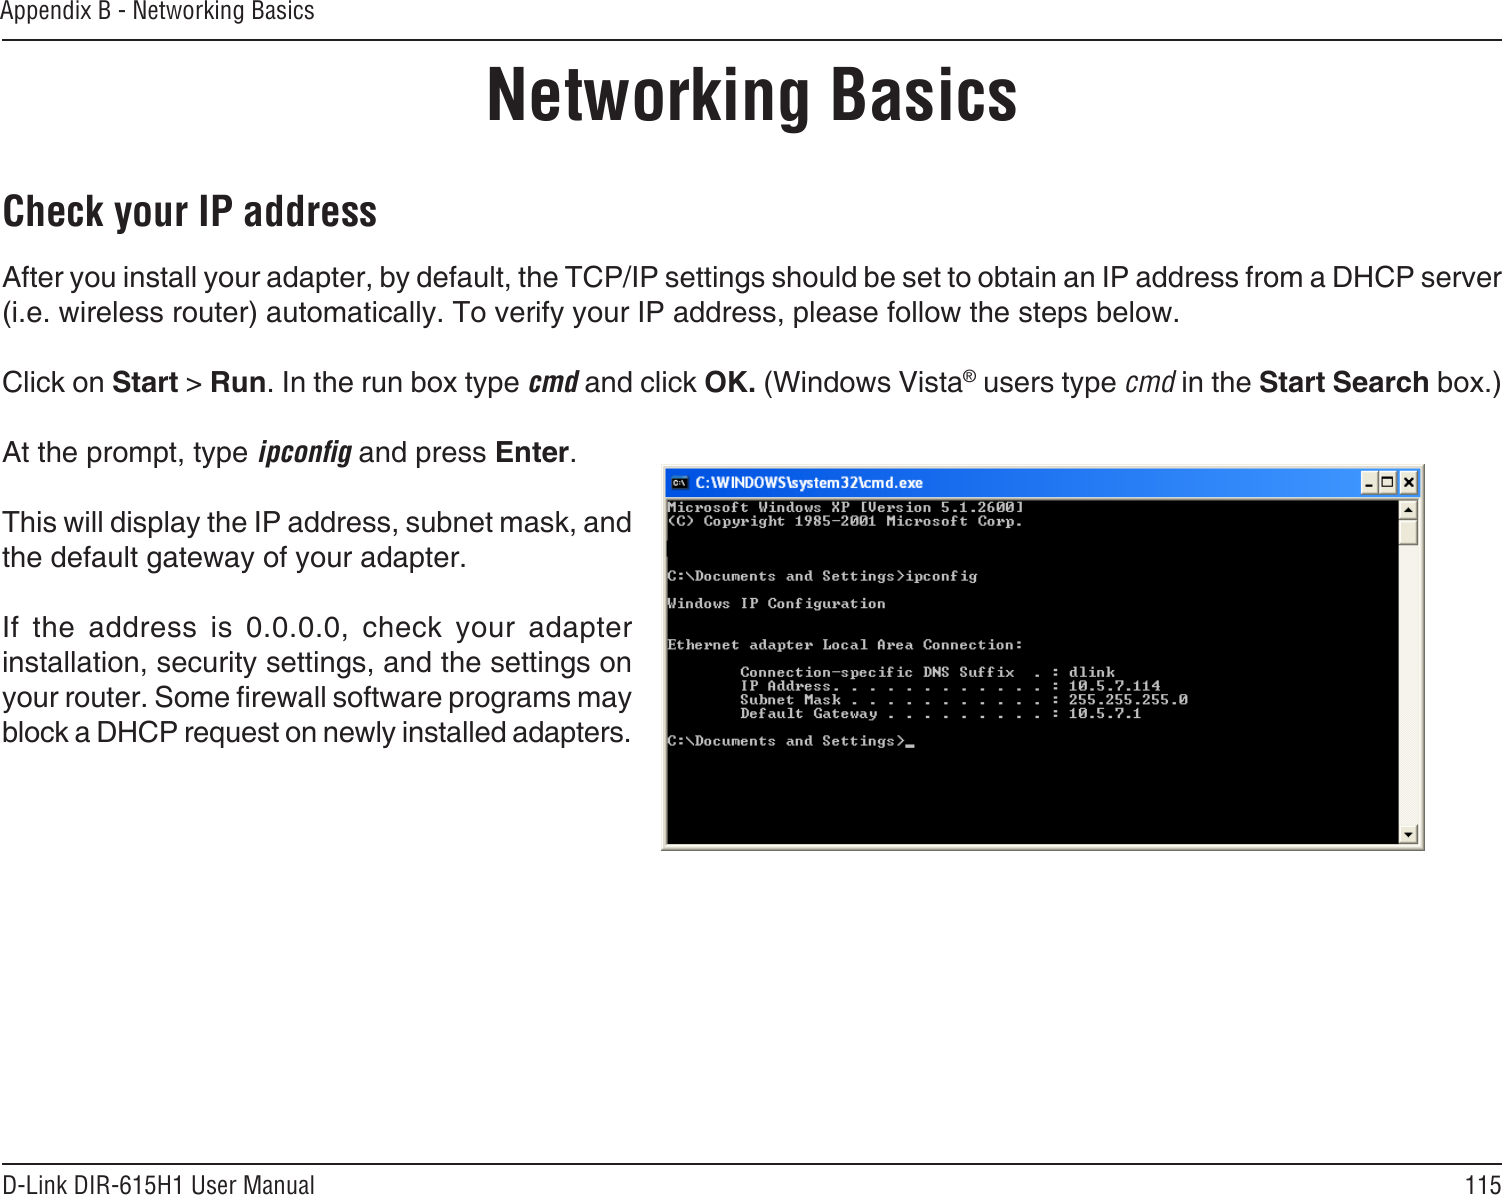 115D-Link DIR-615H1 User ManualAppendix B - Networking BasicsNetworking BasicsCheck your IP addressAfter you install your adapter, by default, the TCP/IP settings should be set to obtain an IP address from a DHCP server (i.e. wireless router) automatically. To verify your IP address, please follow the steps below.Click on Start &gt; Run. In the run box type cmd and click OK. (Windows Vista® users type cmd in the Start Search box.)At the prompt, type ipcong and press Enter.This will display the IP address, subnet mask, and the default gateway of your adapter.If  the  address  is  0.0.0.0,  check  your  adapter installation, security settings, and the settings on your router. Some rewall software programs may block a DHCP request on newly installed adapters. 